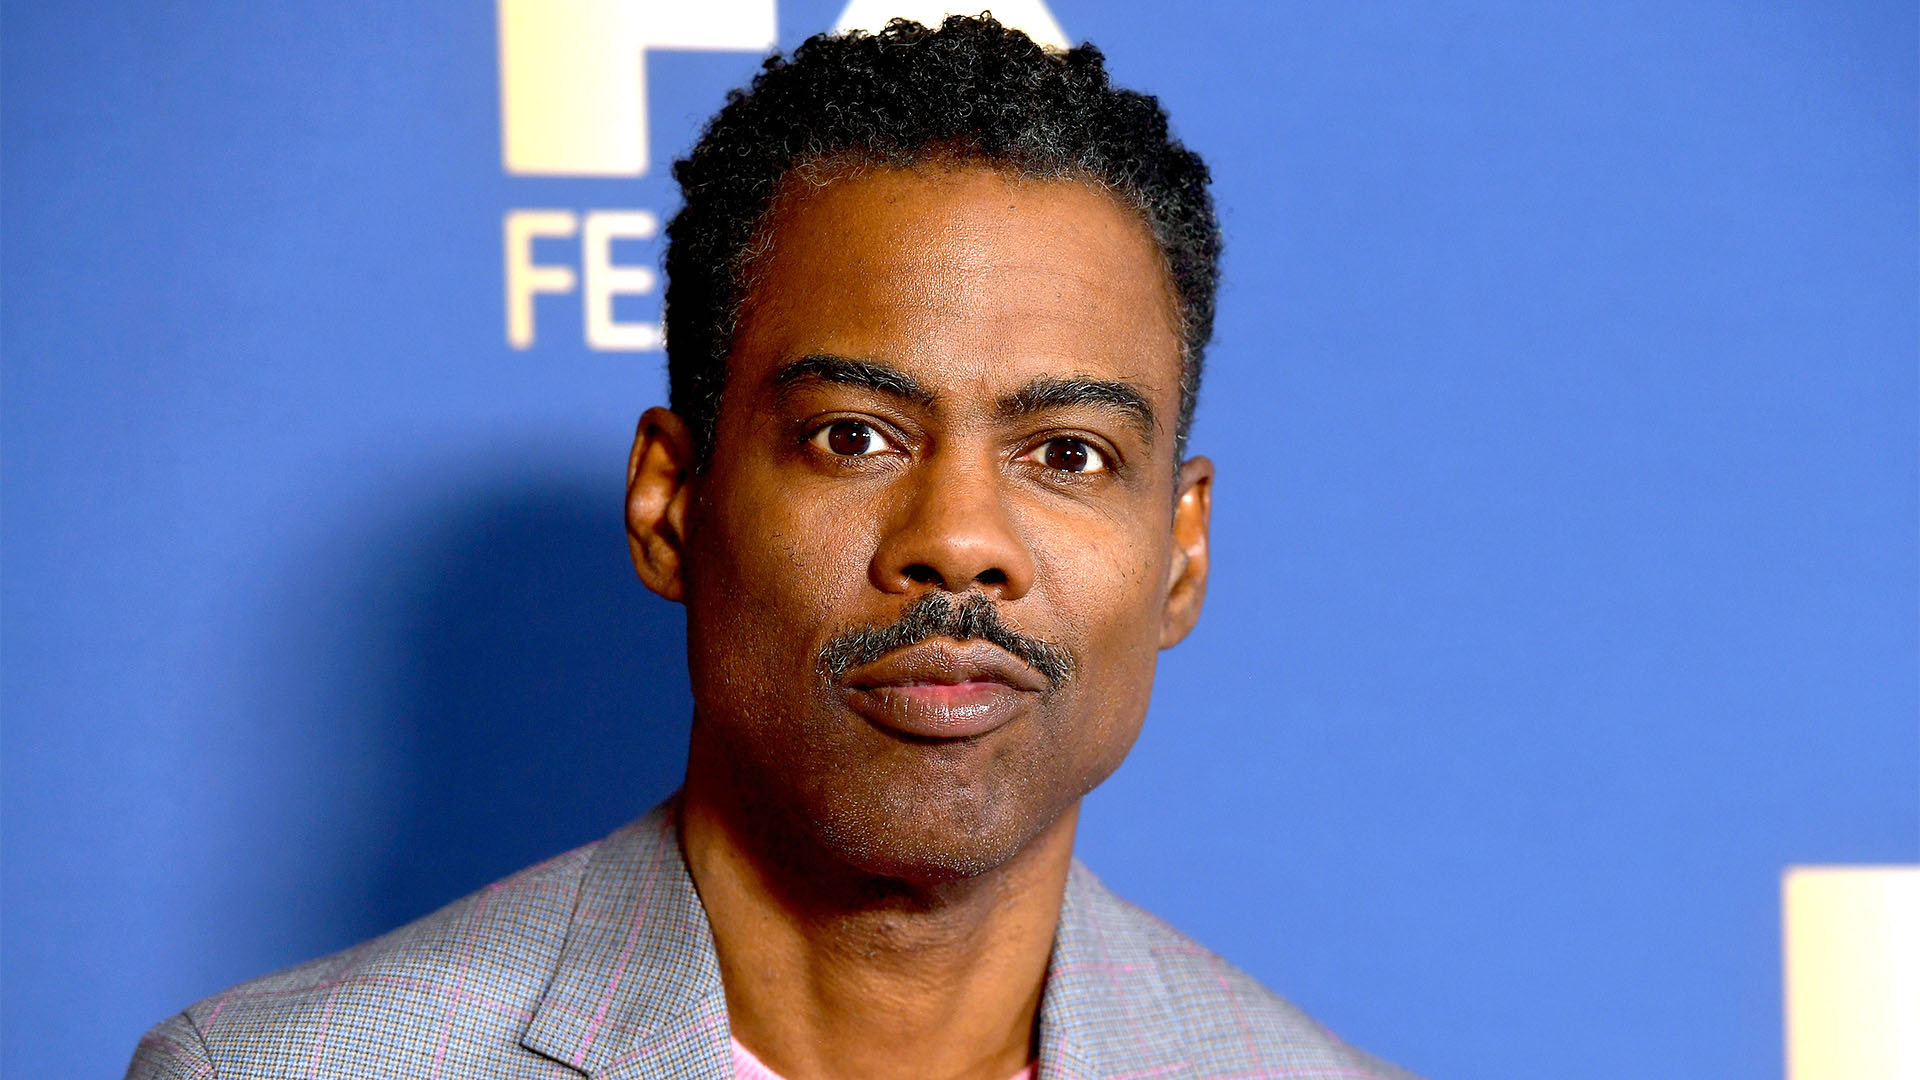 PASADENA, CALIFORNIA - JANUARY 09: Chris Rock of 'Fargo' attends the FX Networks' Star Walk Winter Press Tour 2020 at The Langham Huntington, Pasadena on January 09, 2020 in Pasadena, California. (Photo by Matt Winkelmeyer/Getty Images)